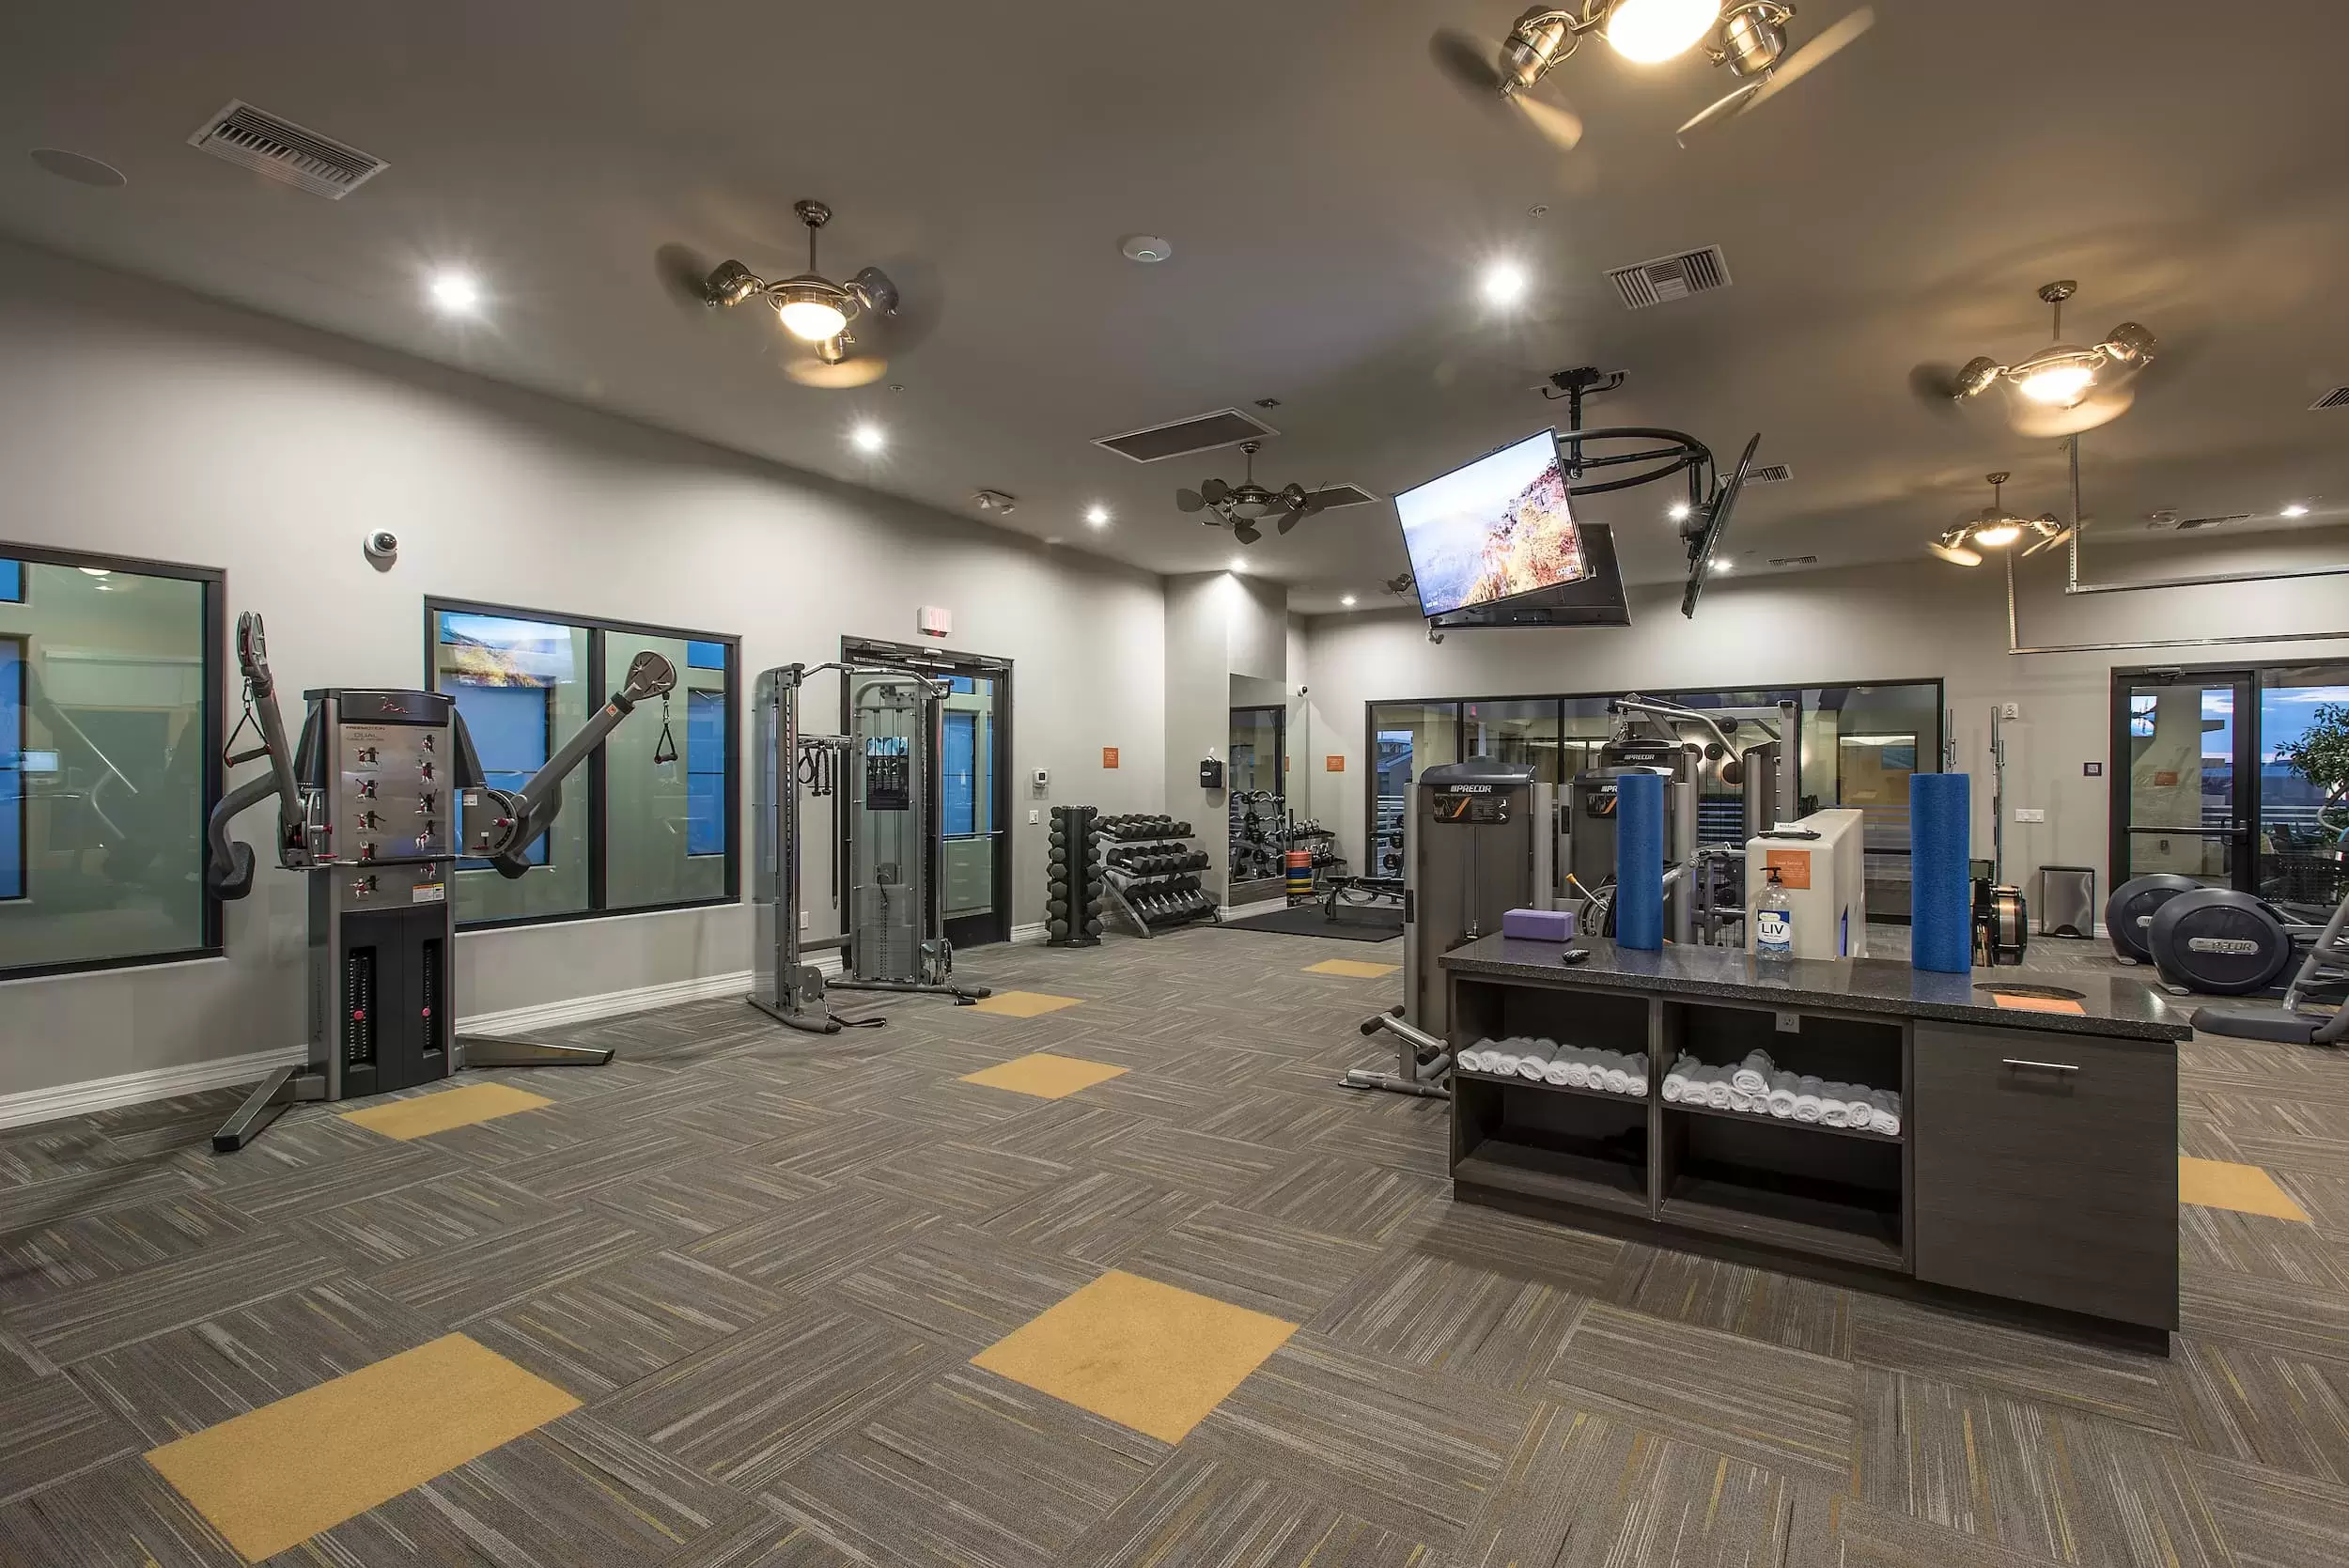 The fitness center, with lots of exercise equipment and weights available for residents to enjoy.